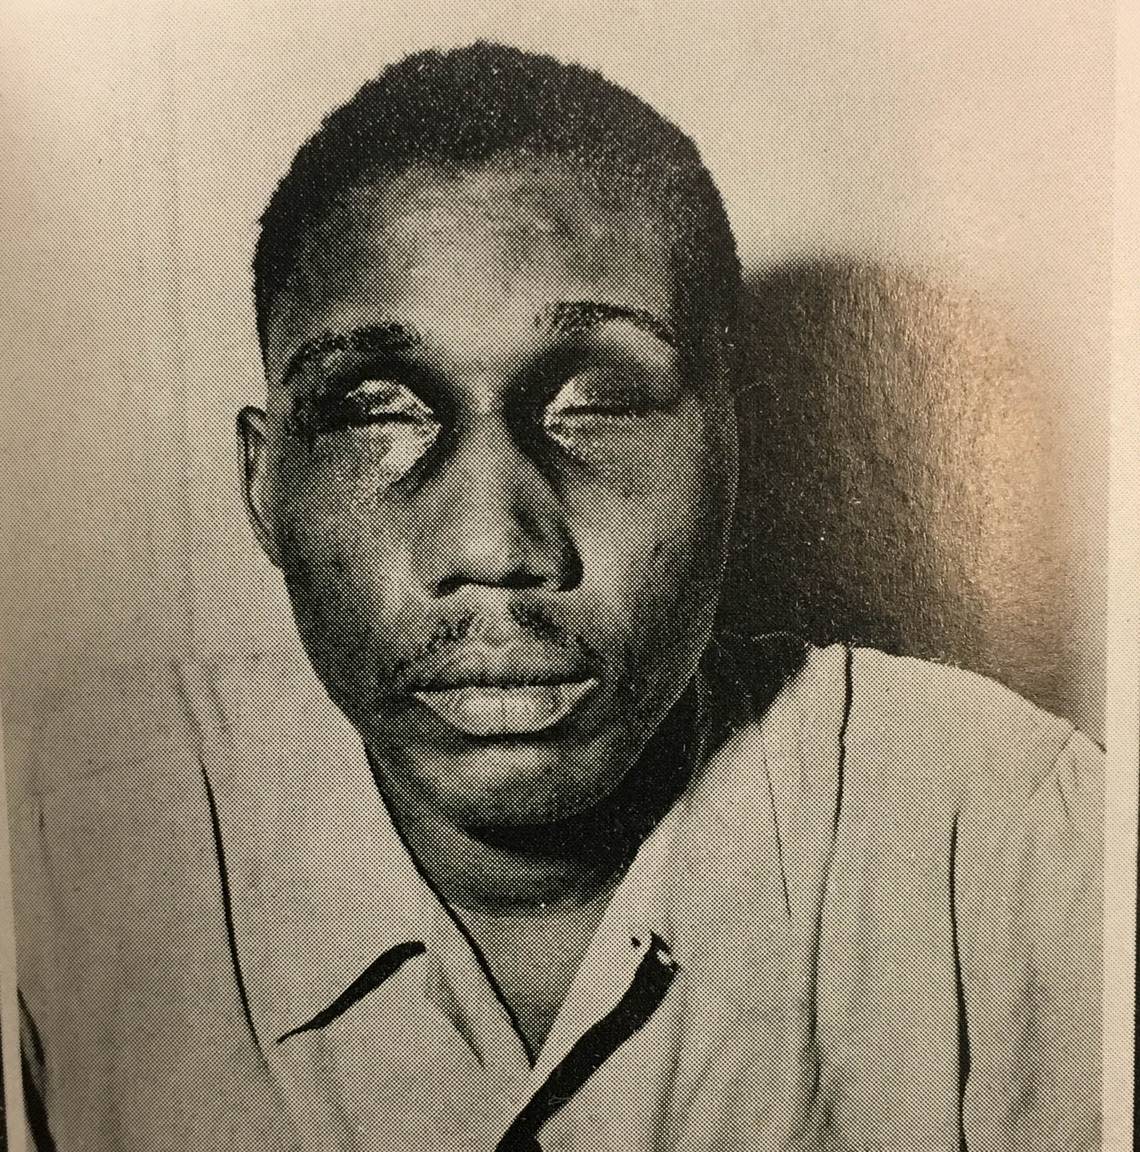 Isaac Woodard was arrested by Batesburg police chief Lynwood Shull. While in custody Woodard was beaten so badly he was blinded. J. DeBisse, Library of Congress